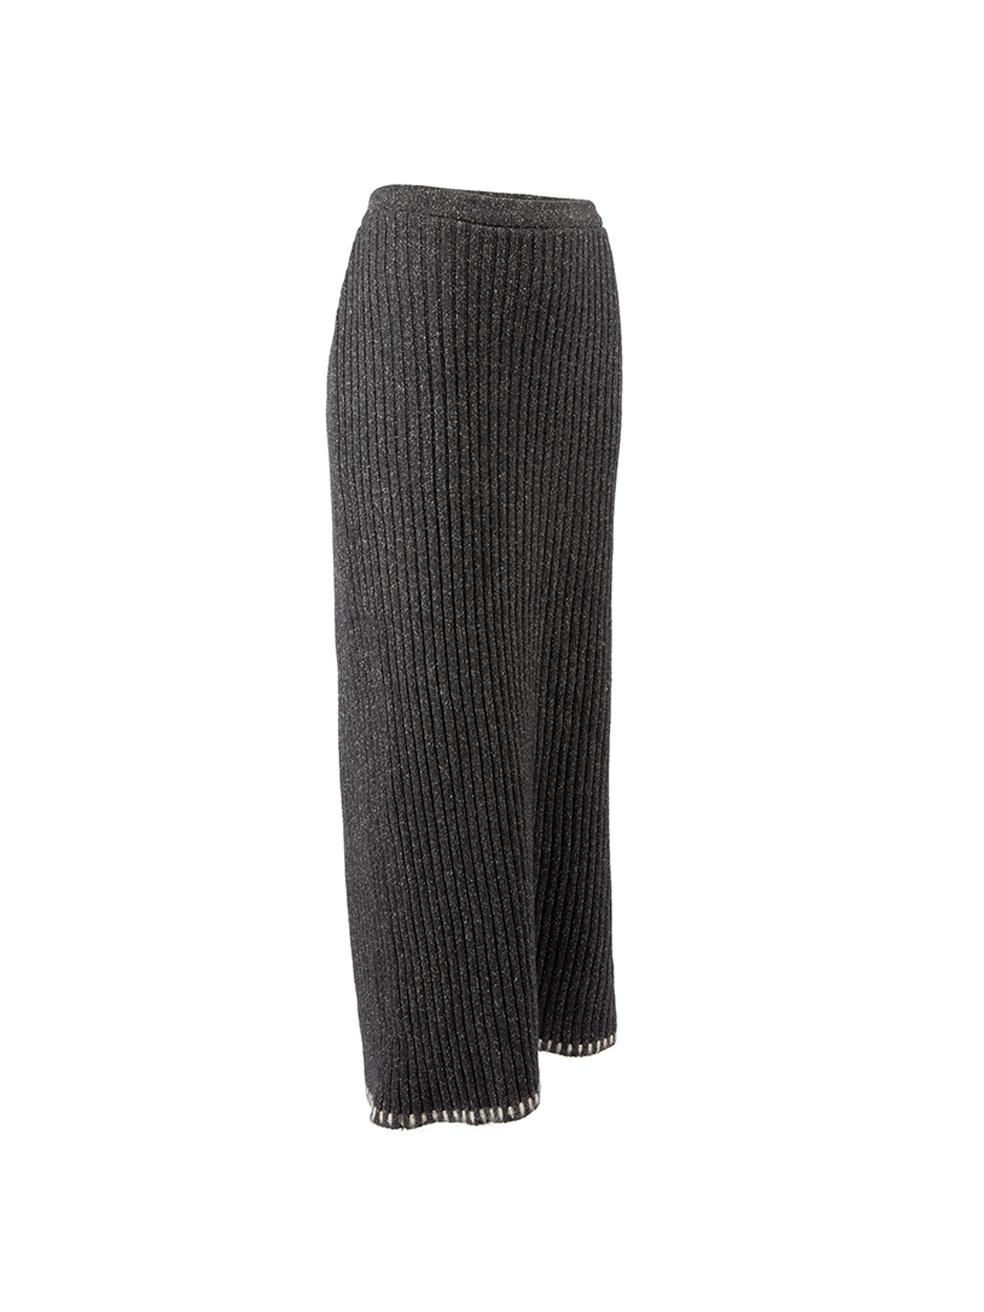 CONDITION is Very good. Hardly any visible wear to skirt is evident on this used Christian Dior Boutique designer resale item. 



Details


Grey

Wool

Midi skirt

Ribbed knitted

Stretchy





Made in Italy



Composition

35% Nylon, 25% Mohair,